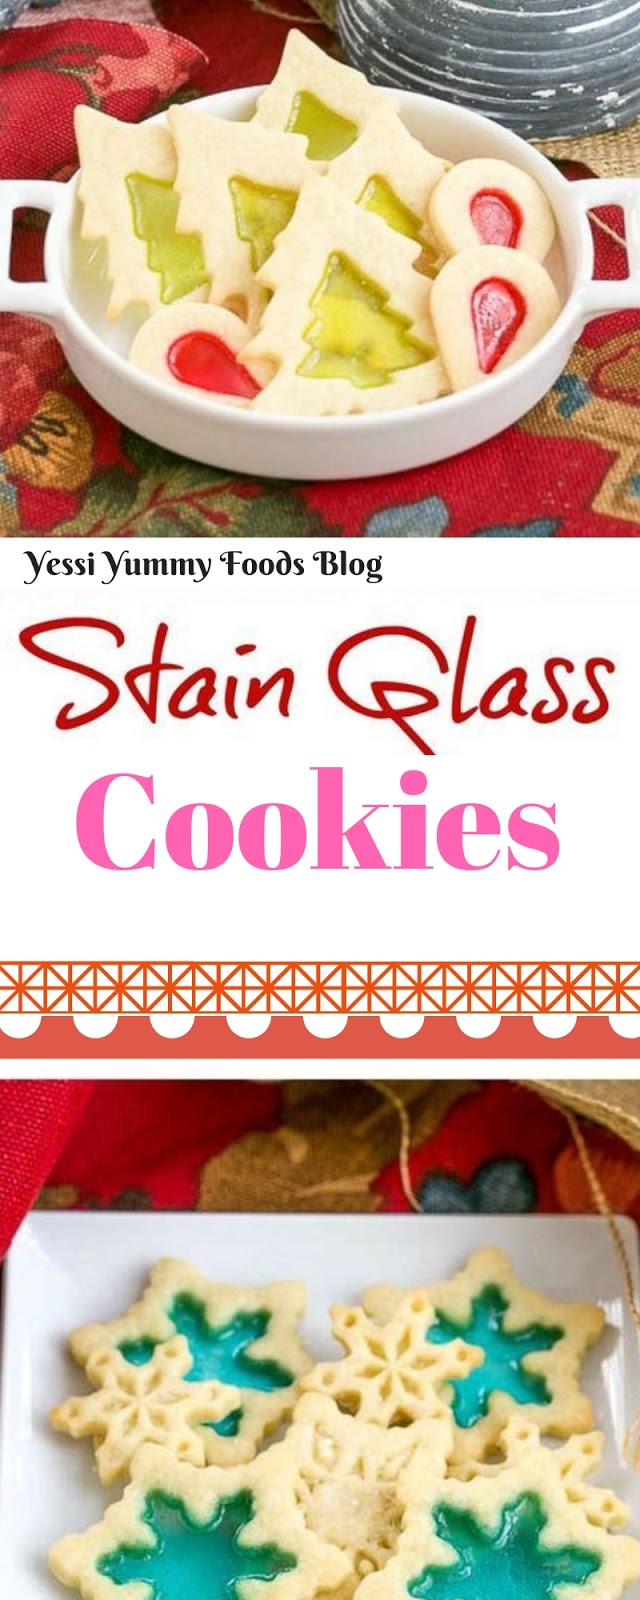 Stained Glass Cookies #Christmas #Cookies | Yessi Yummy Foods